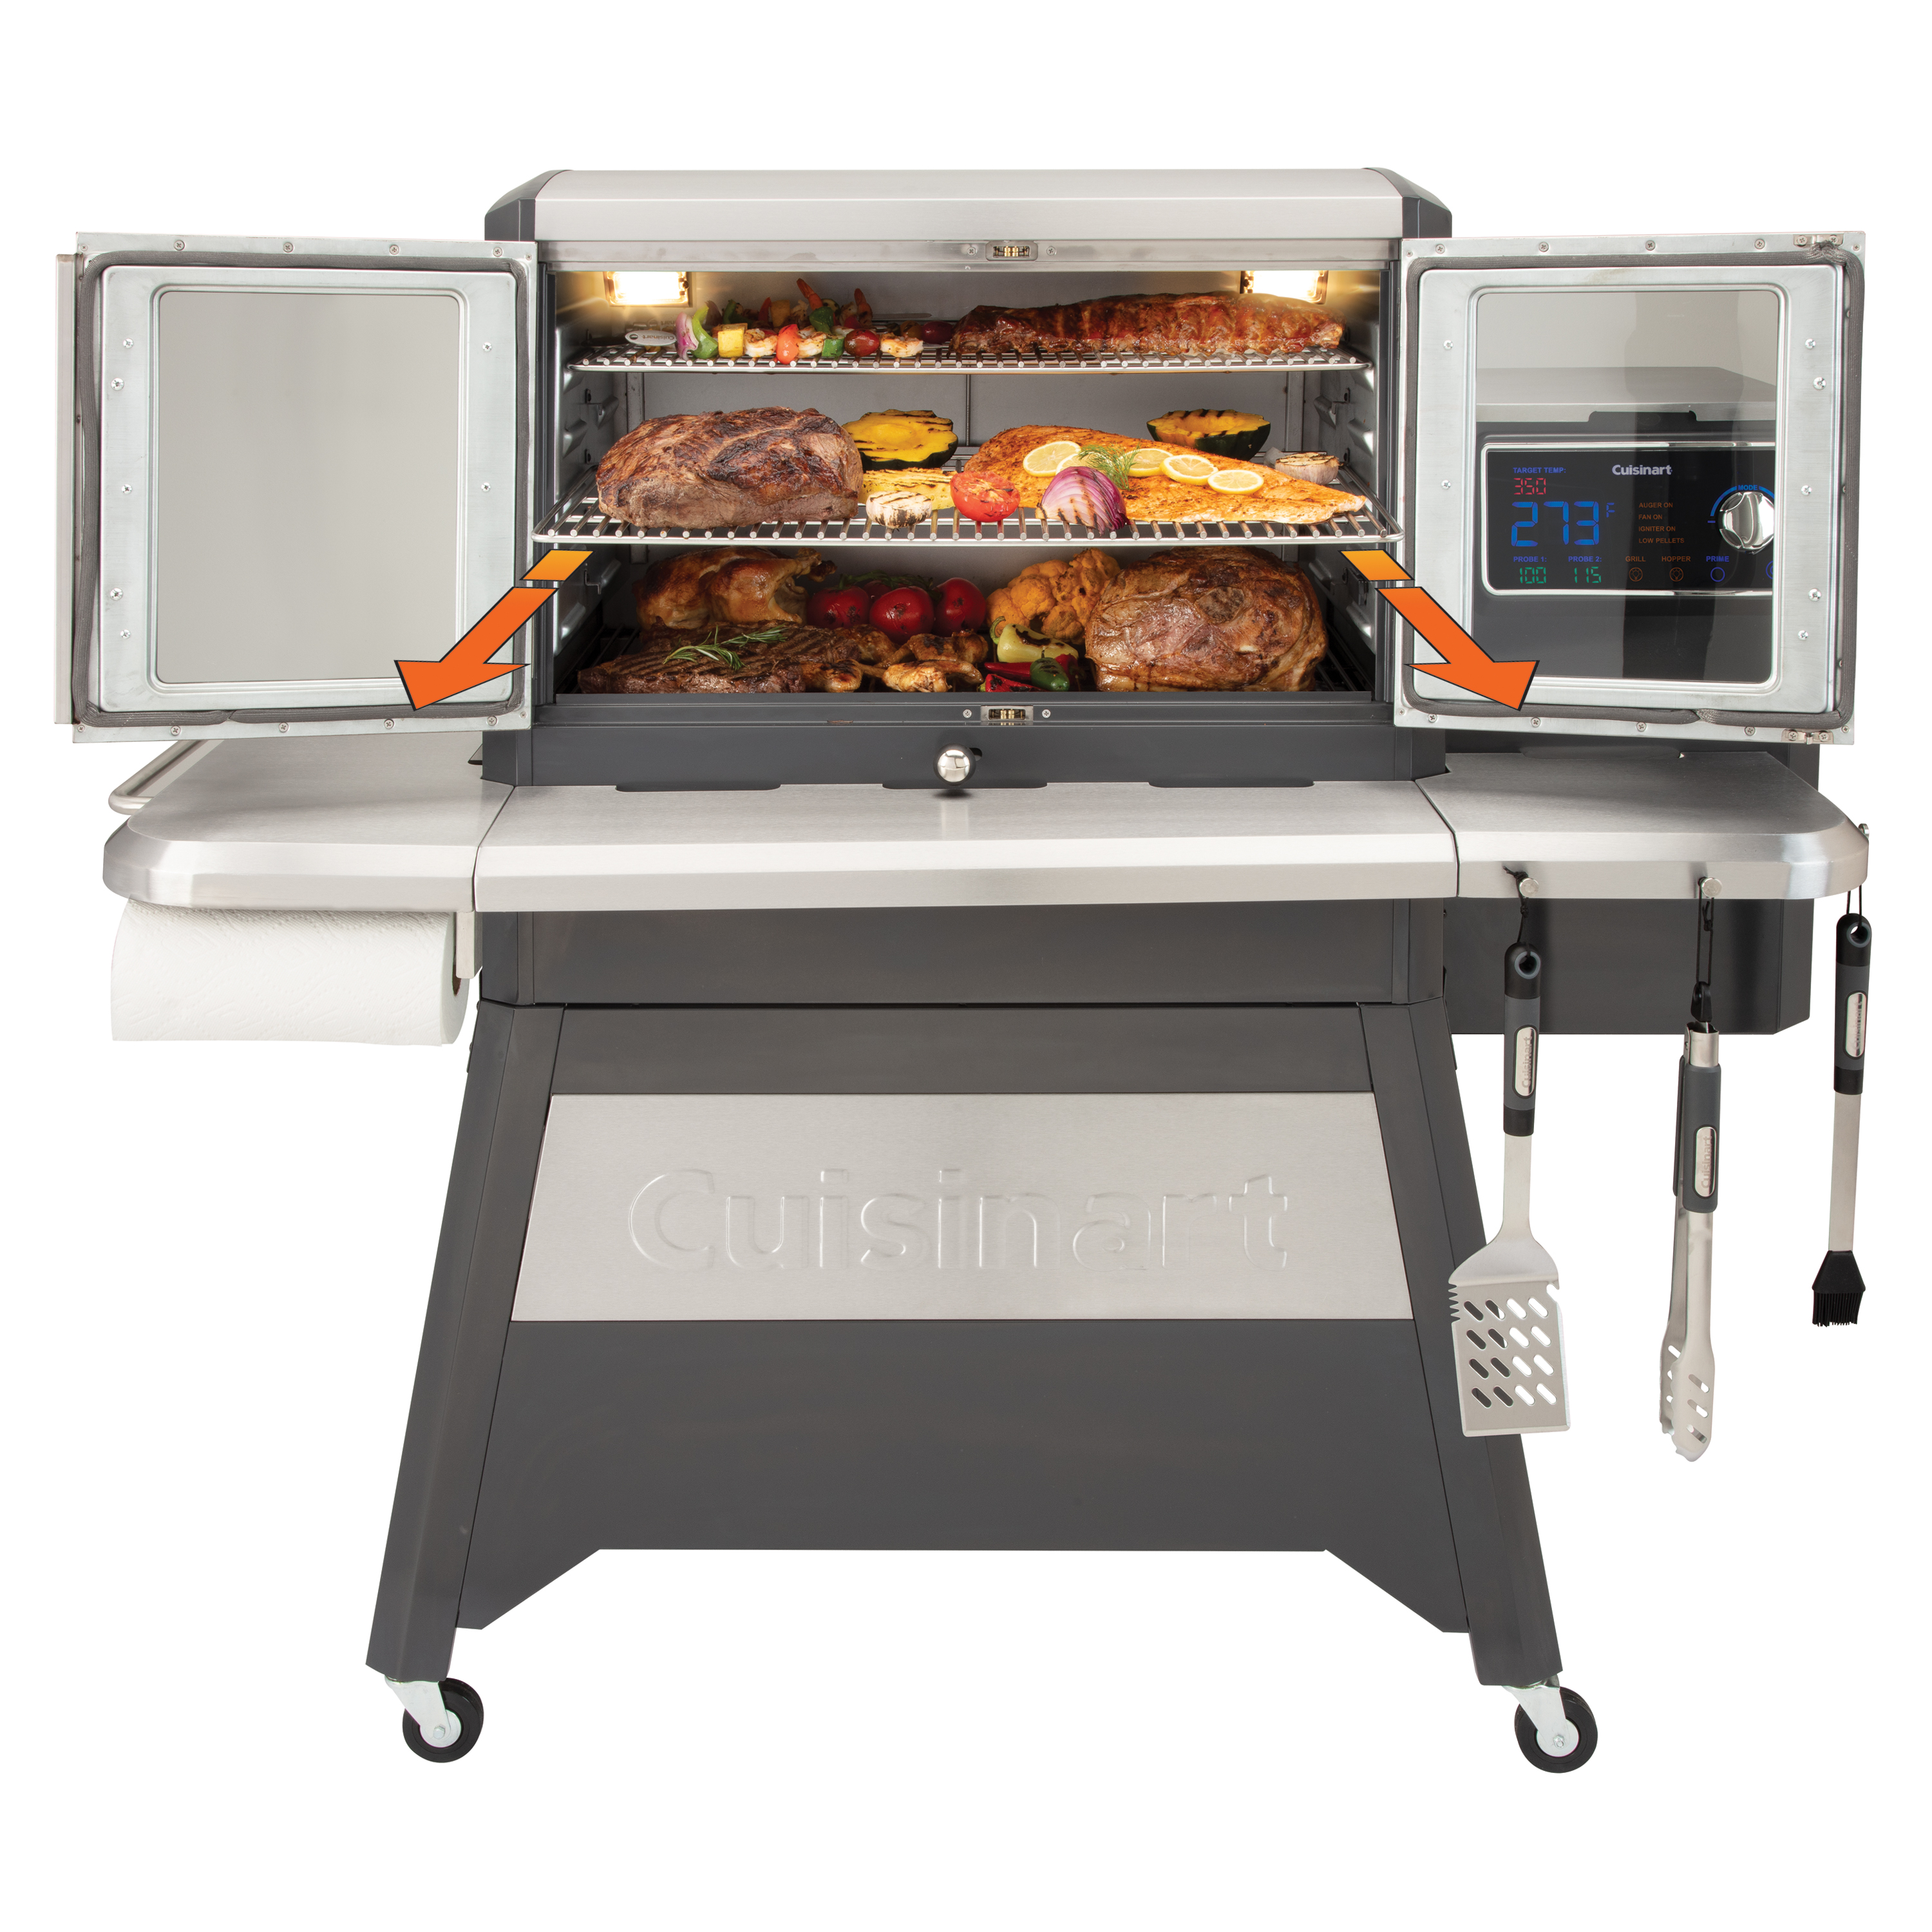 Cuisinart Clermont Pellet Grill & Smoker - image 5 of 37